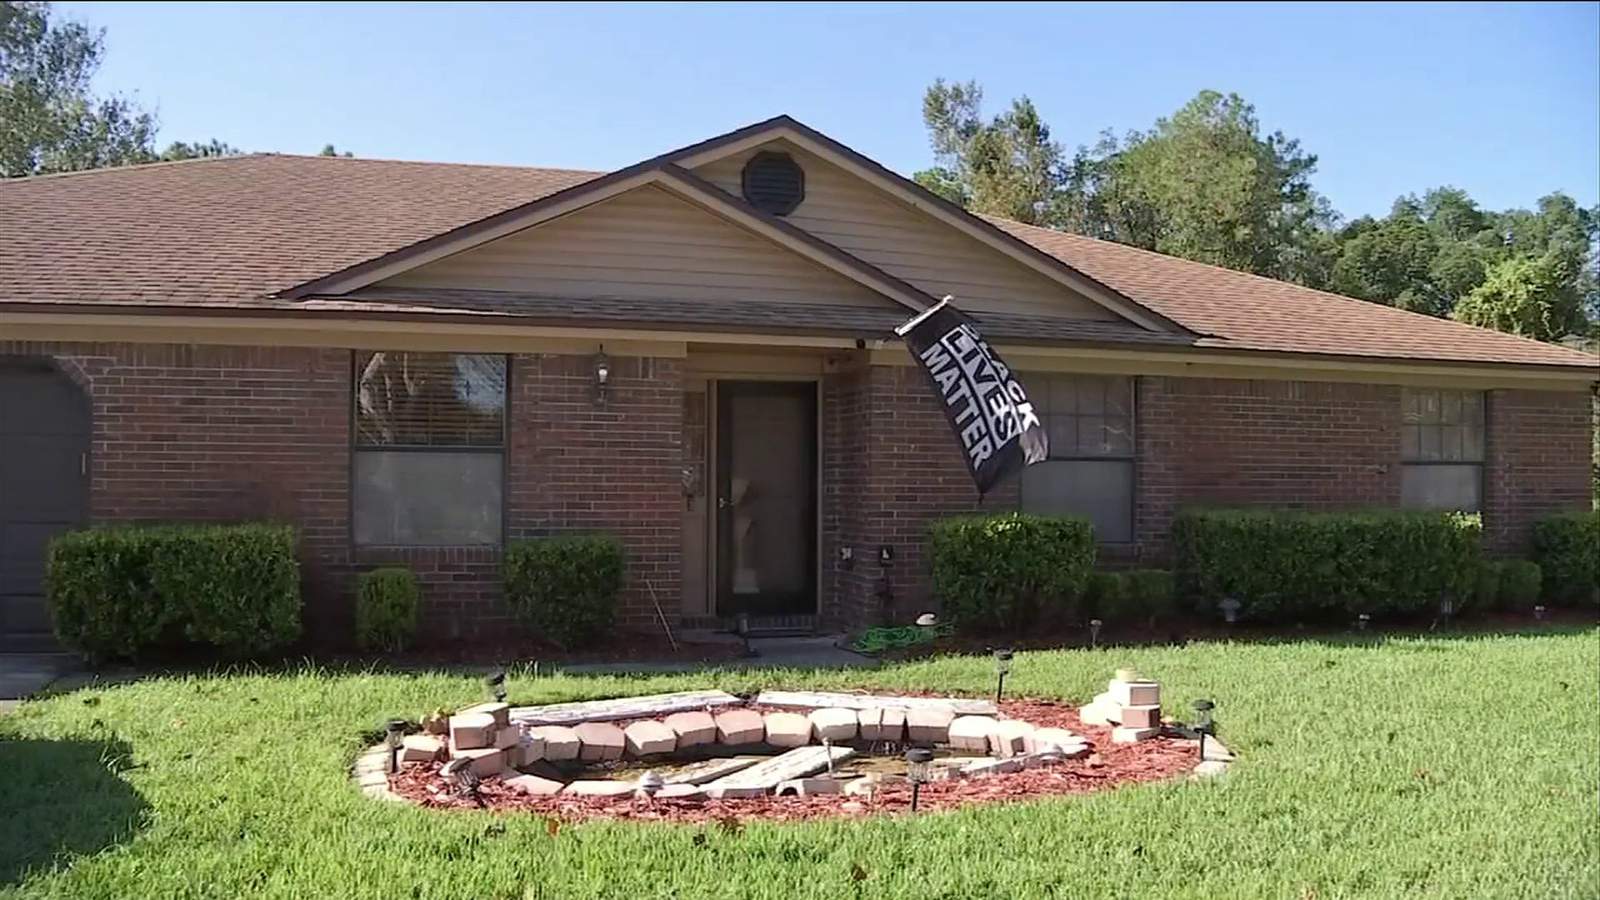 Homeowner sues over HOA’s order to remove BLM flag